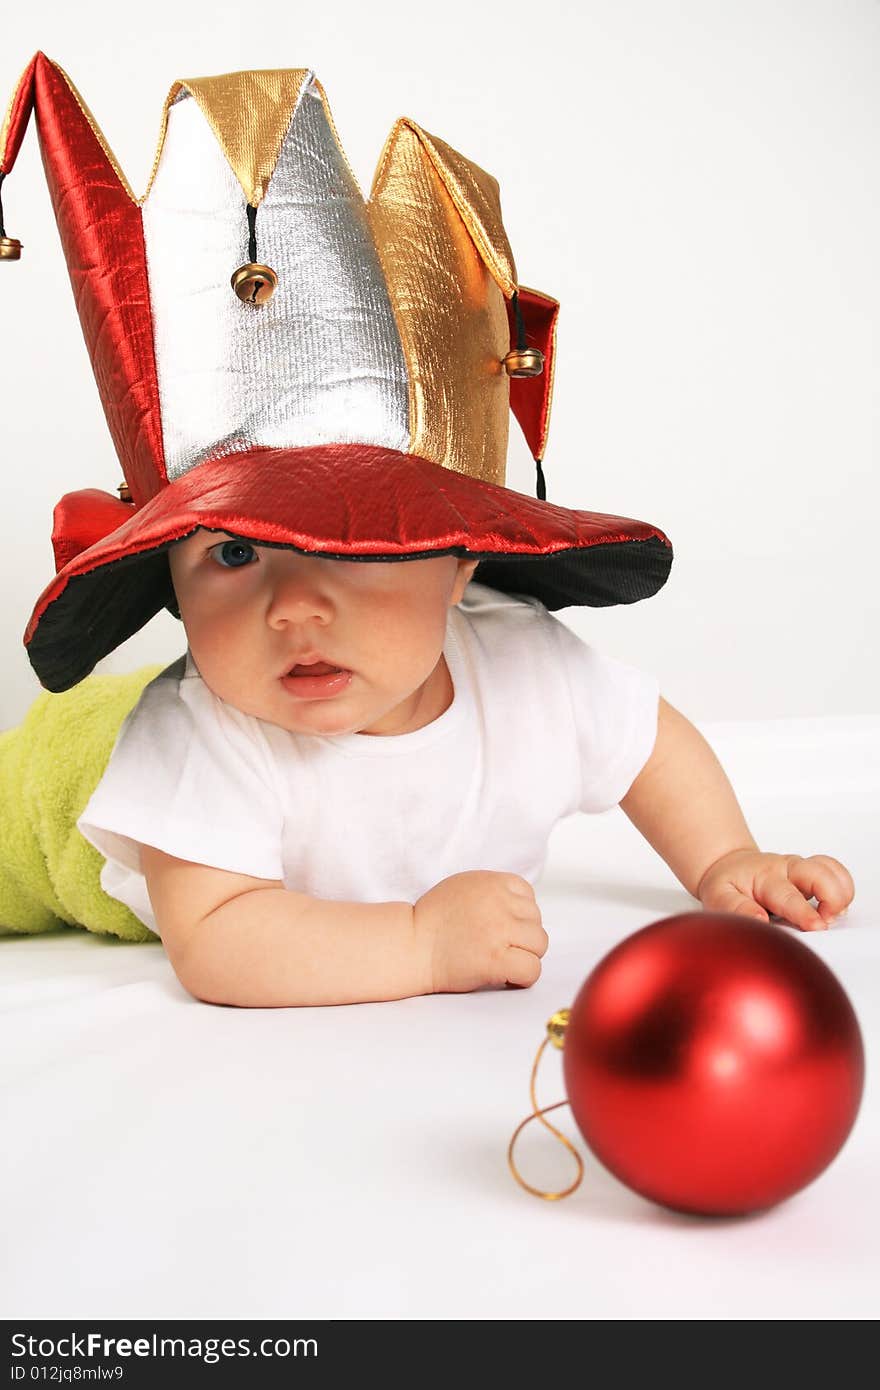 Small boy in the hat of jester plays with the red sphere